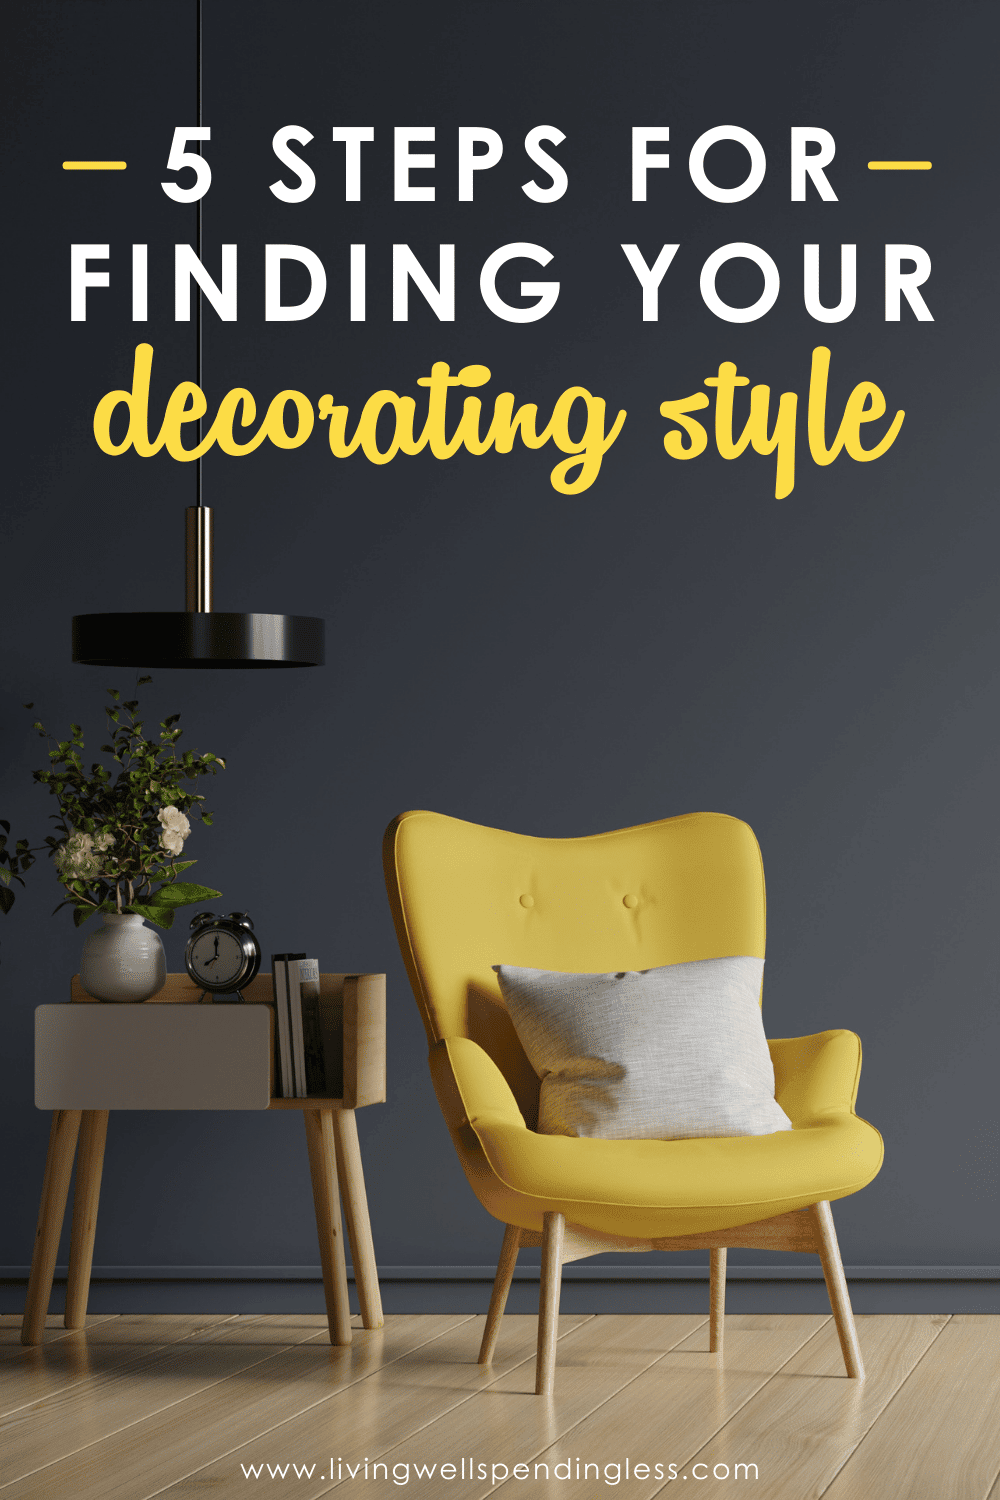 Five Steps to Finding Your Decorating Style | Find Your Home Decor Style